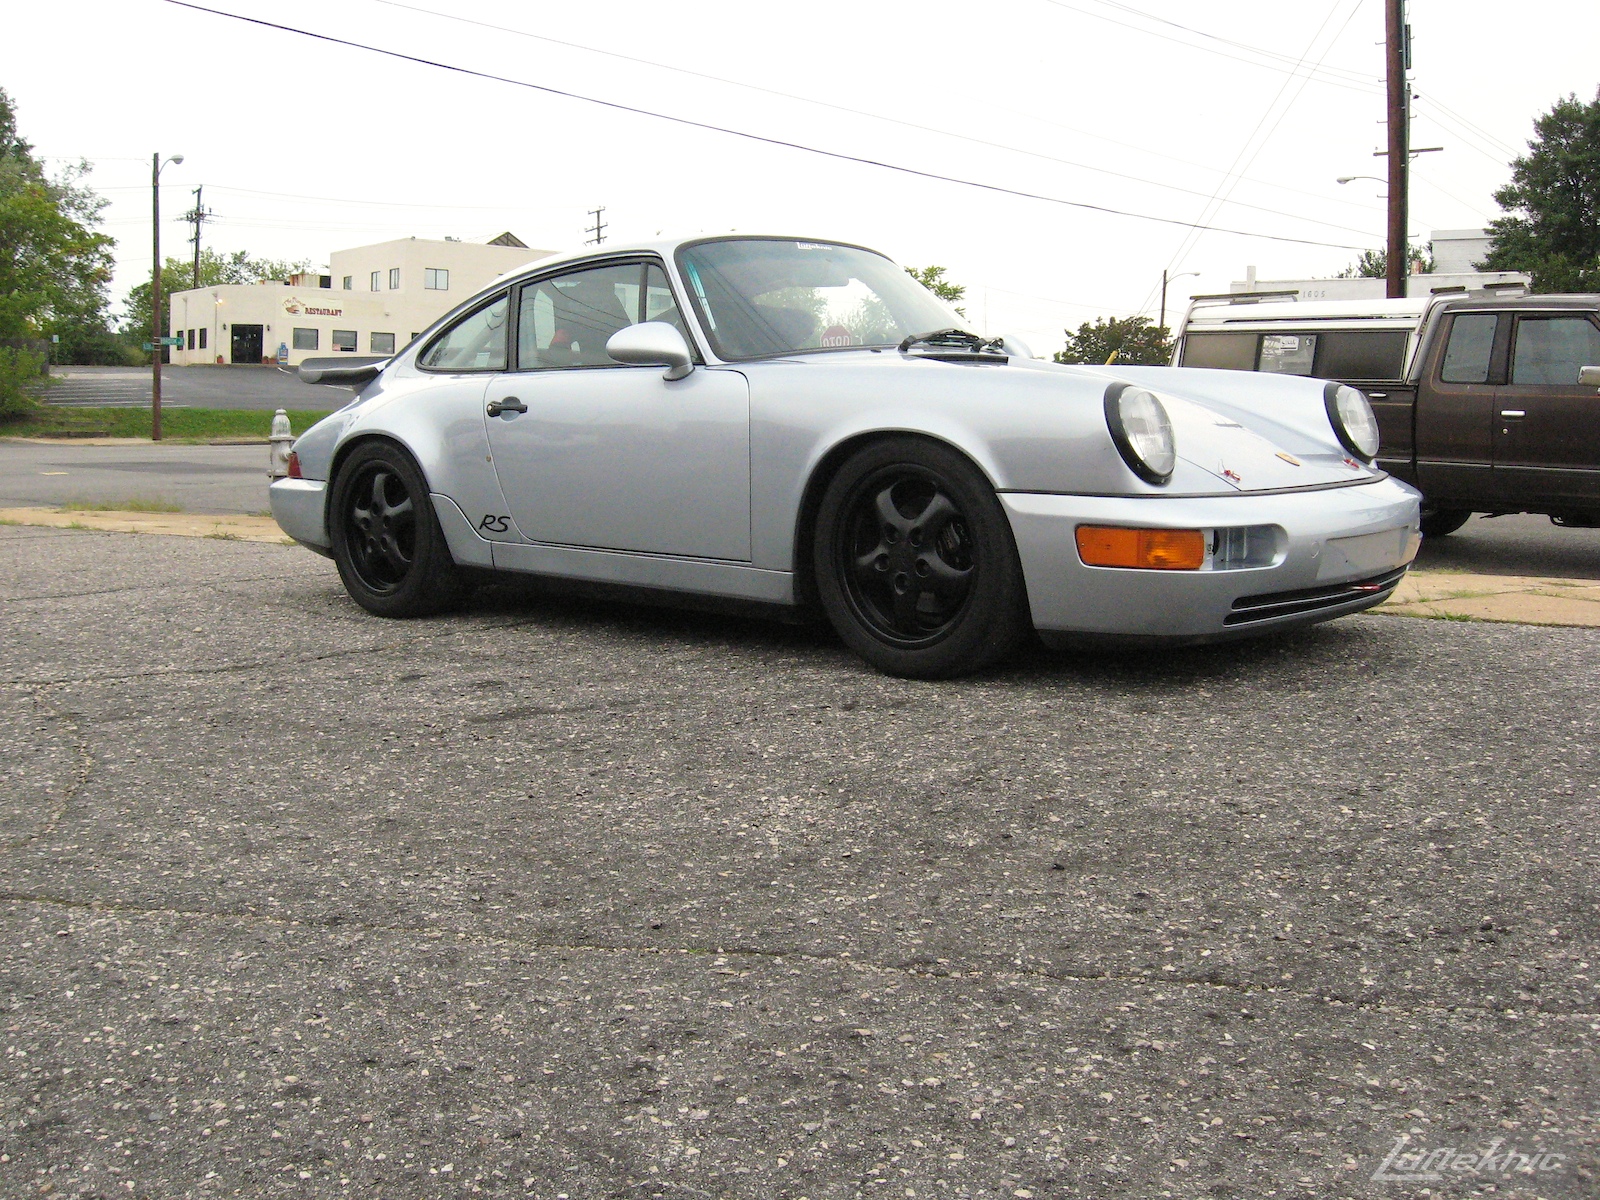 The completed 964 RS America project sitting in the Lüfteknic parking lot.